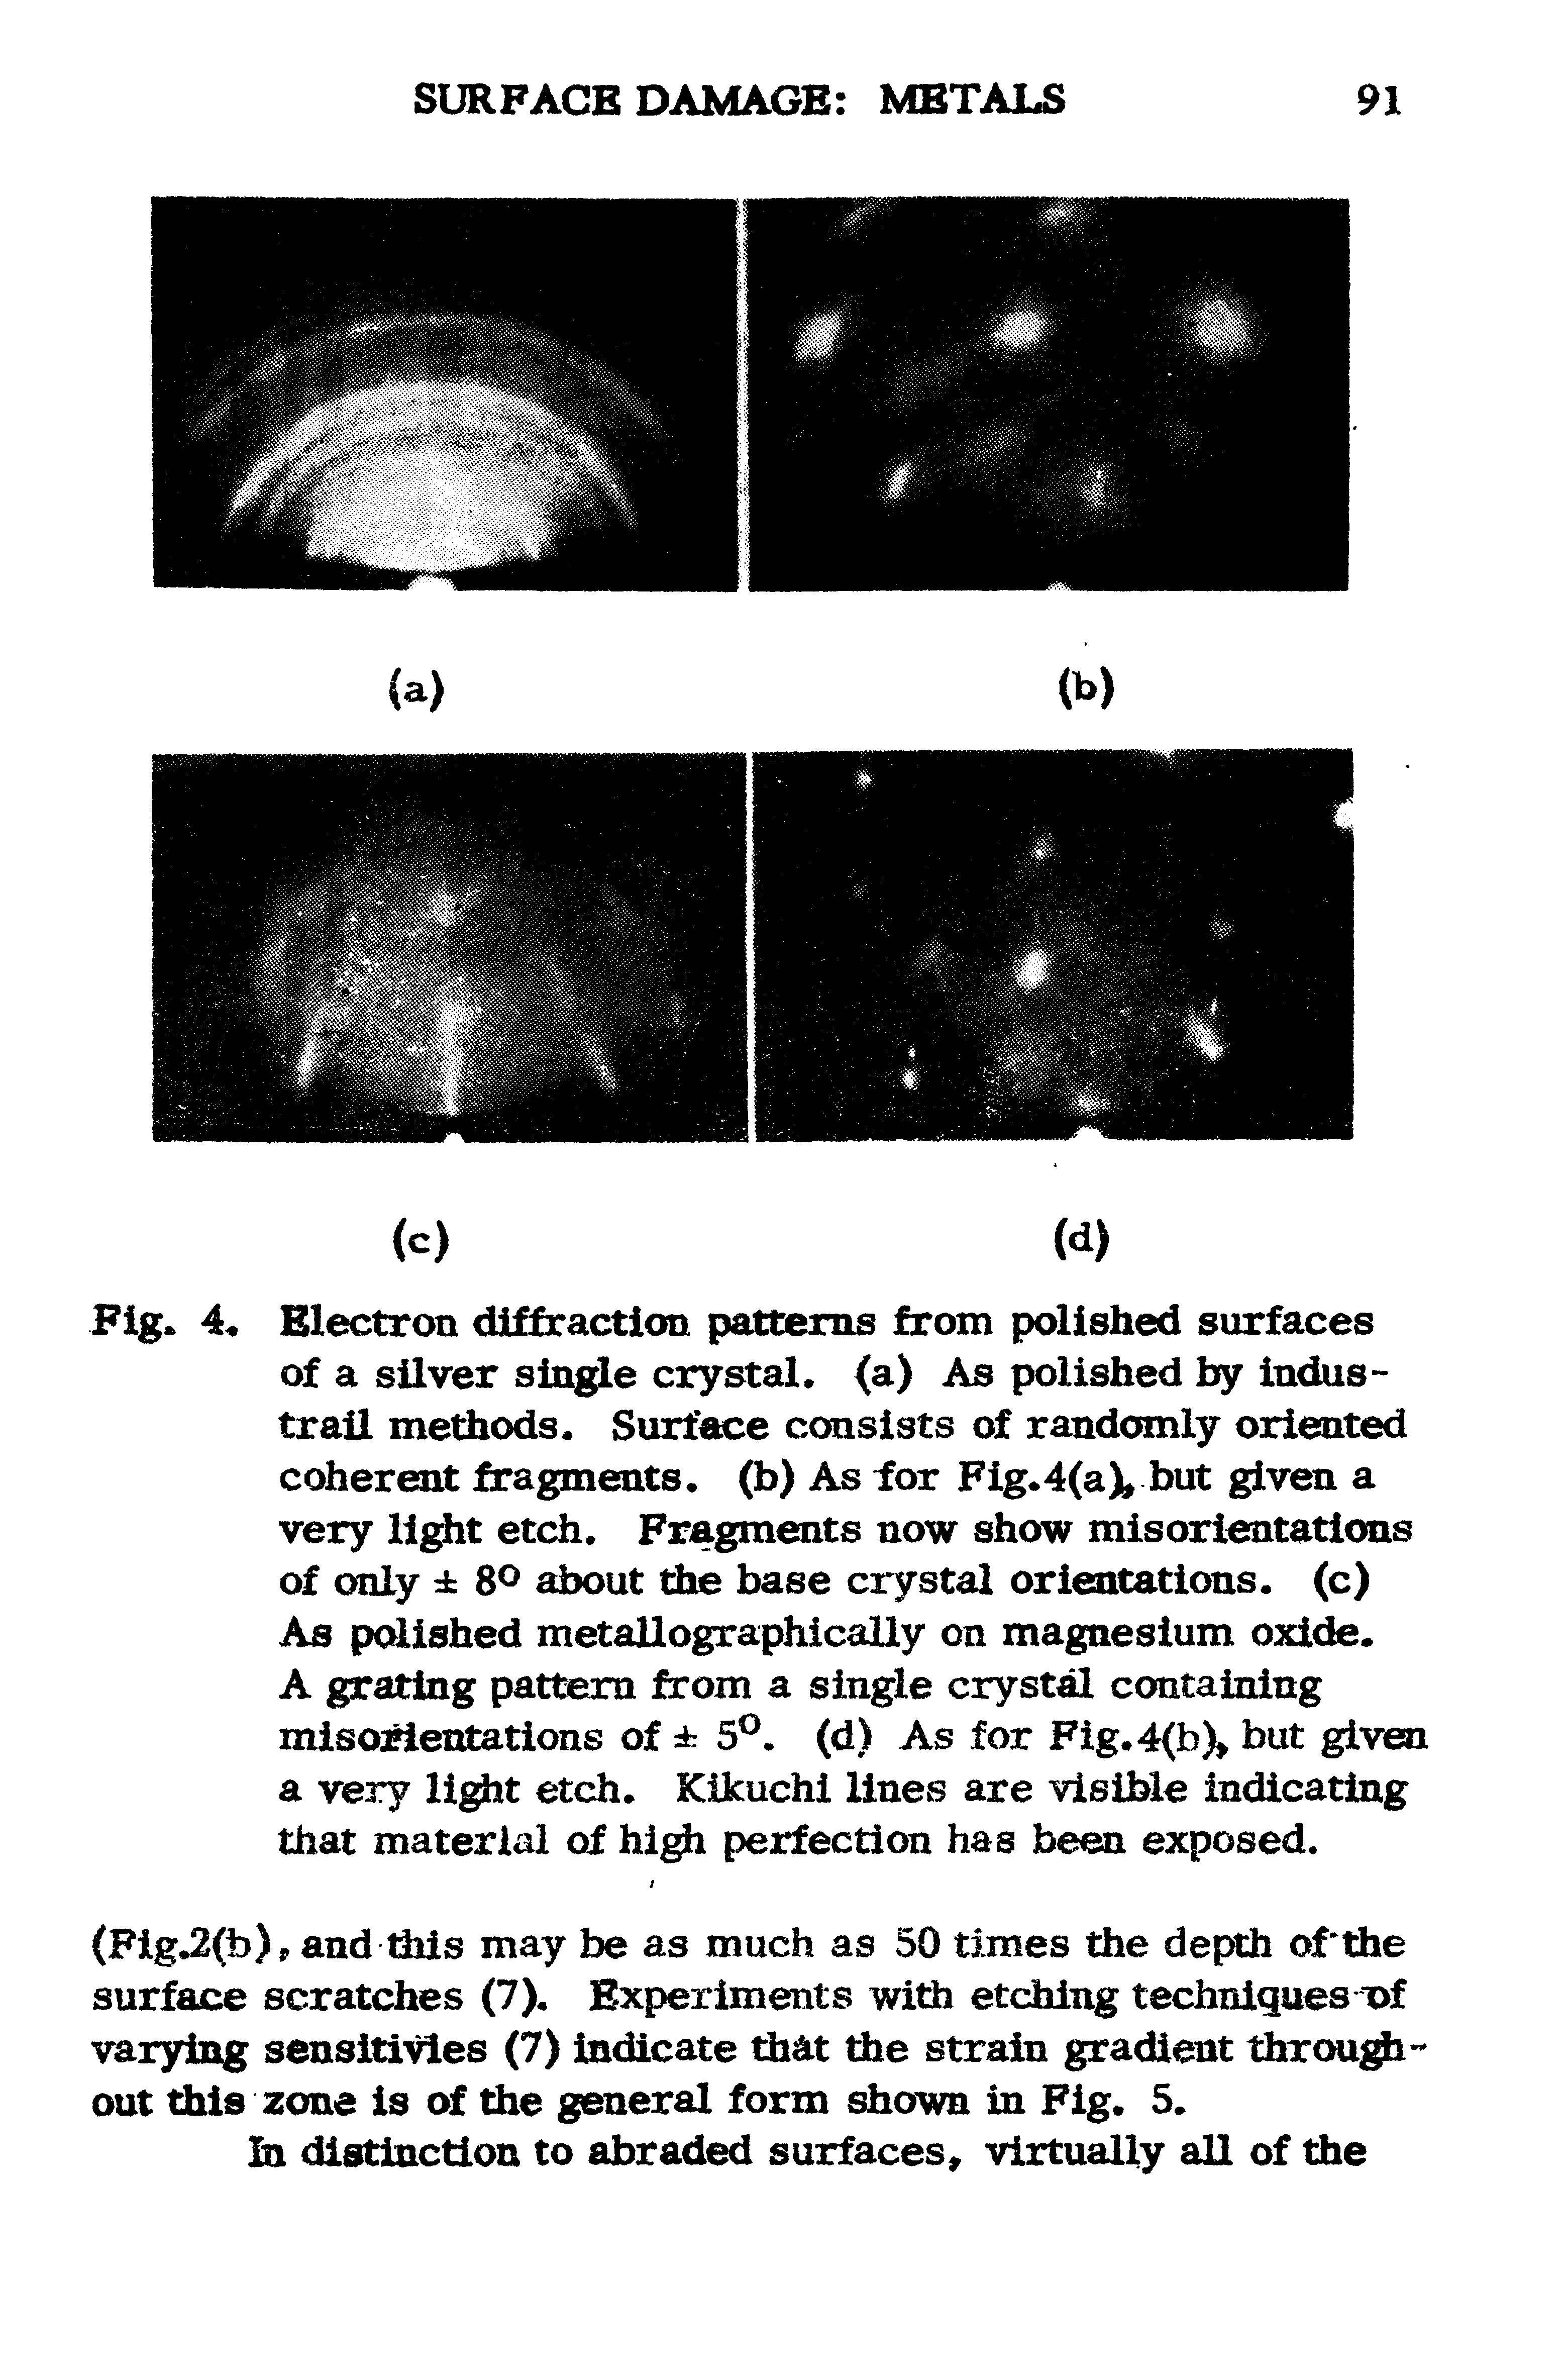 Fig. 4. Electron diffraction patterns from polished surfaces of a silver single crystal, (a) As polished by indus-trail methods. Surface consists of randomly oriented coherent fragments, (b) As for Fig.4(a), but given a very light etch. Fragments now show mis orientations of only 8° about the base crystal orientations, (c)...